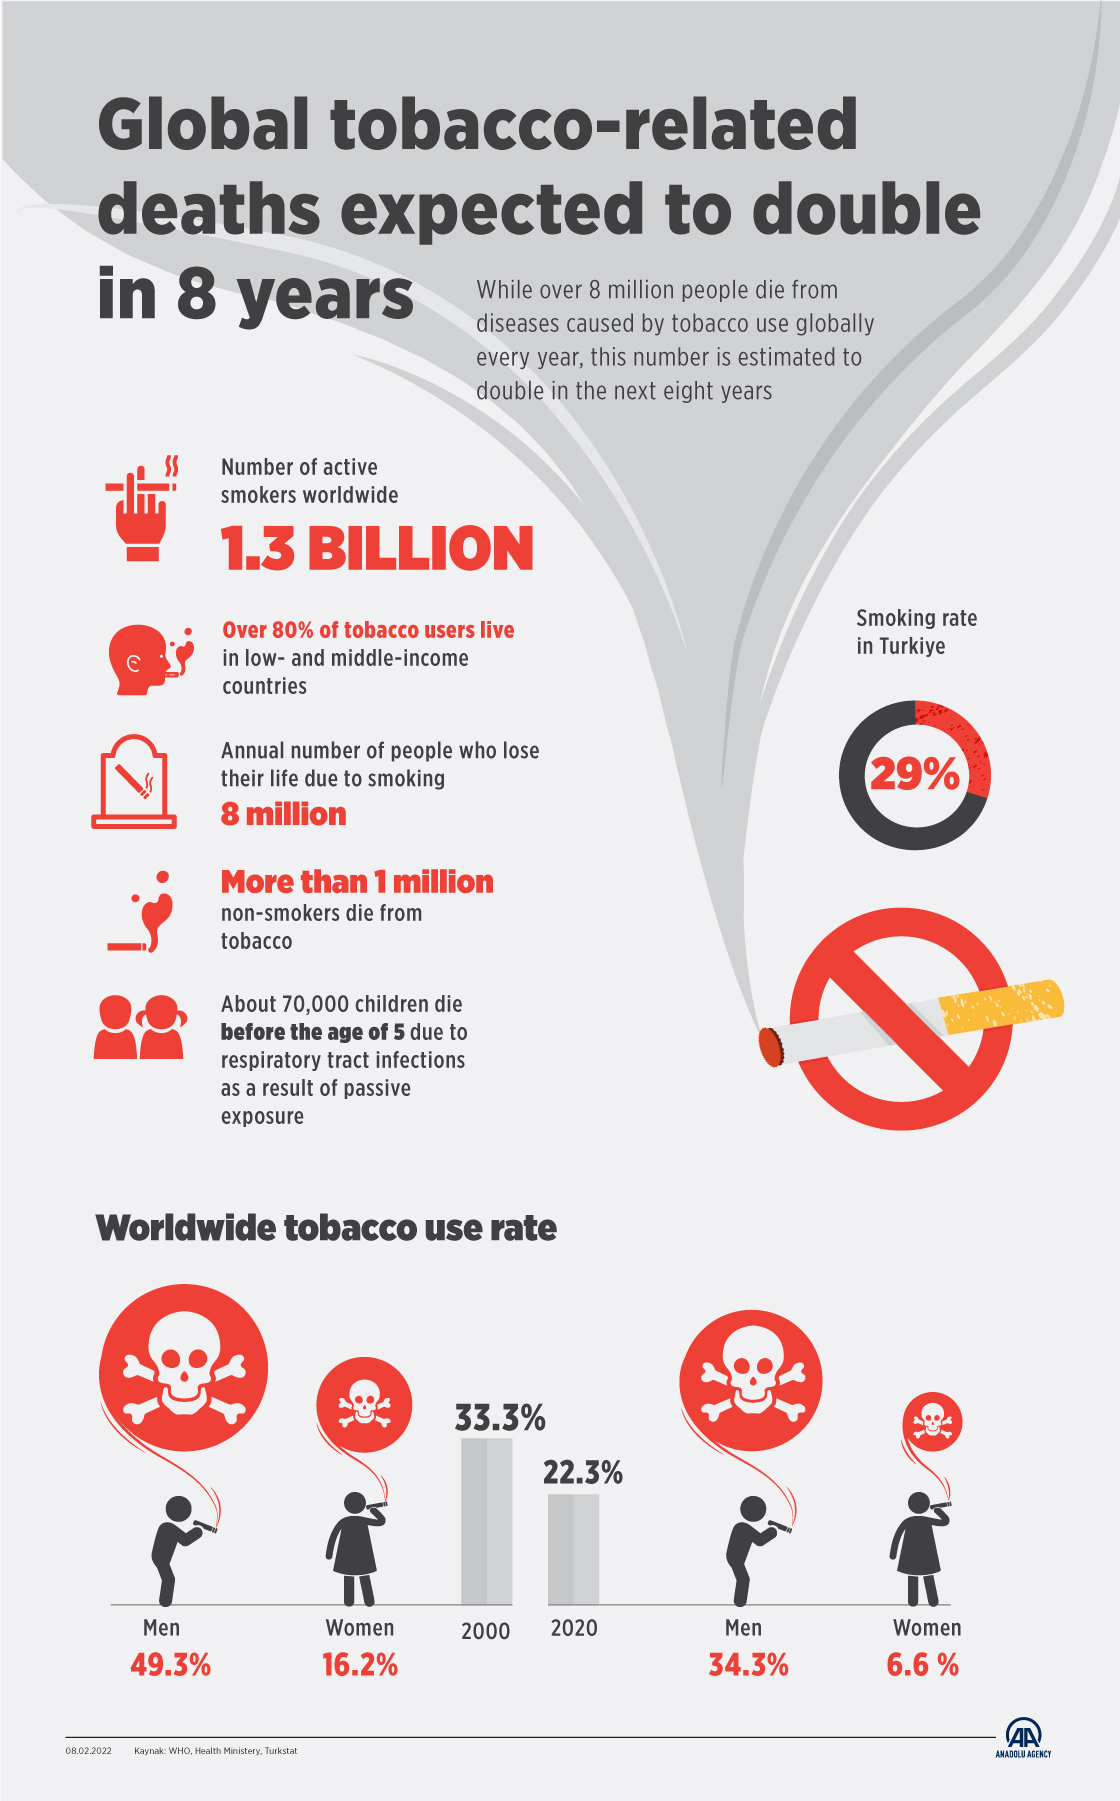 Global tobacco-related deaths expected to double in 8 years